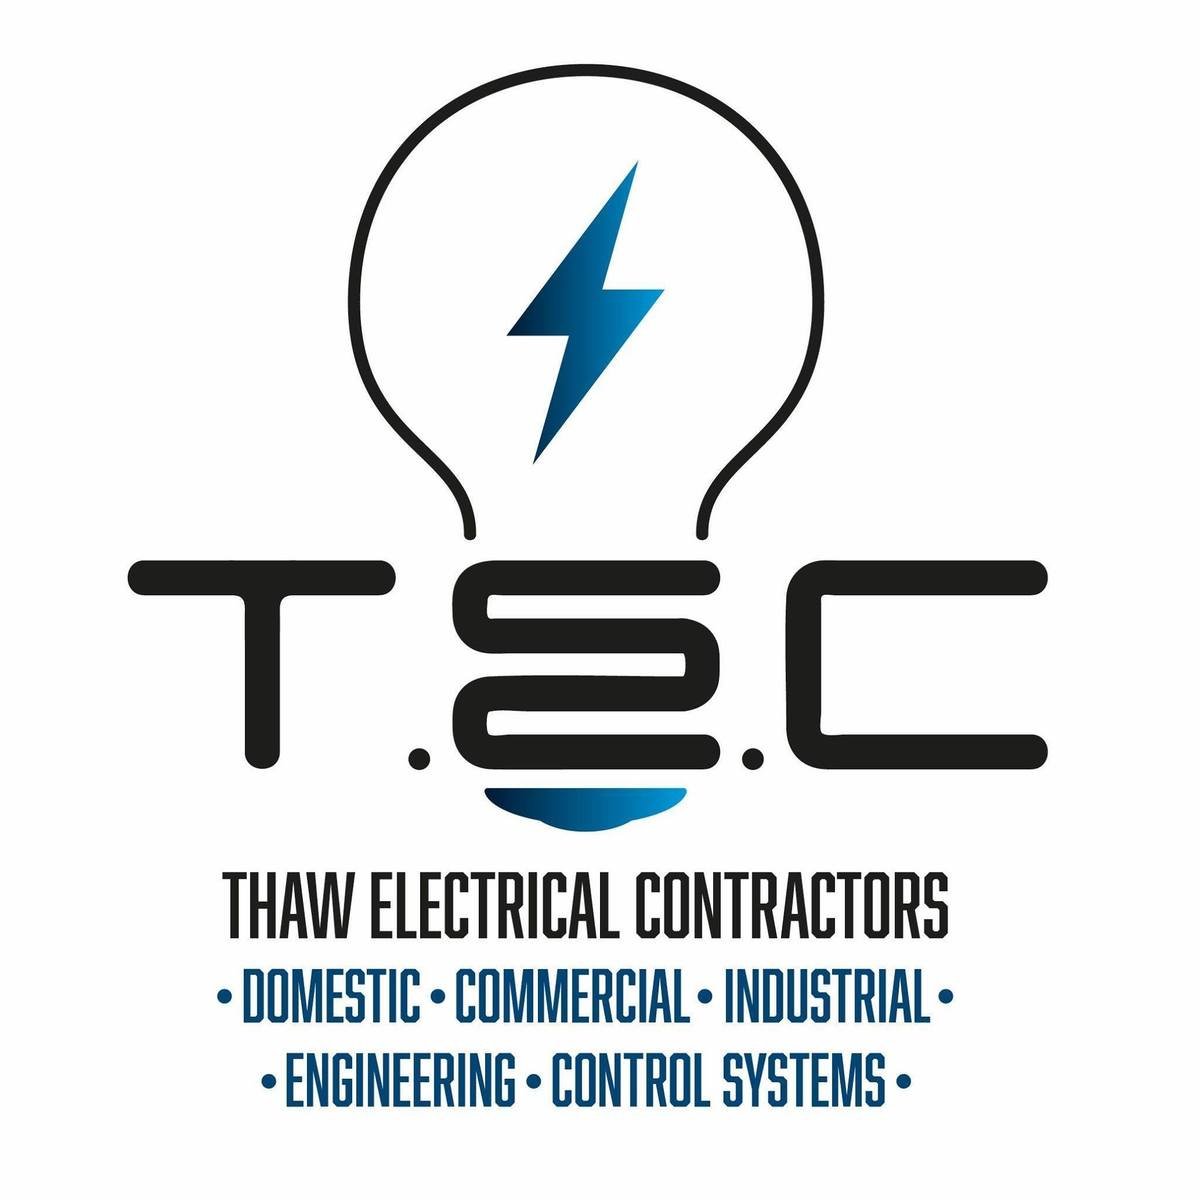 Thaw Electrical Contractors logo